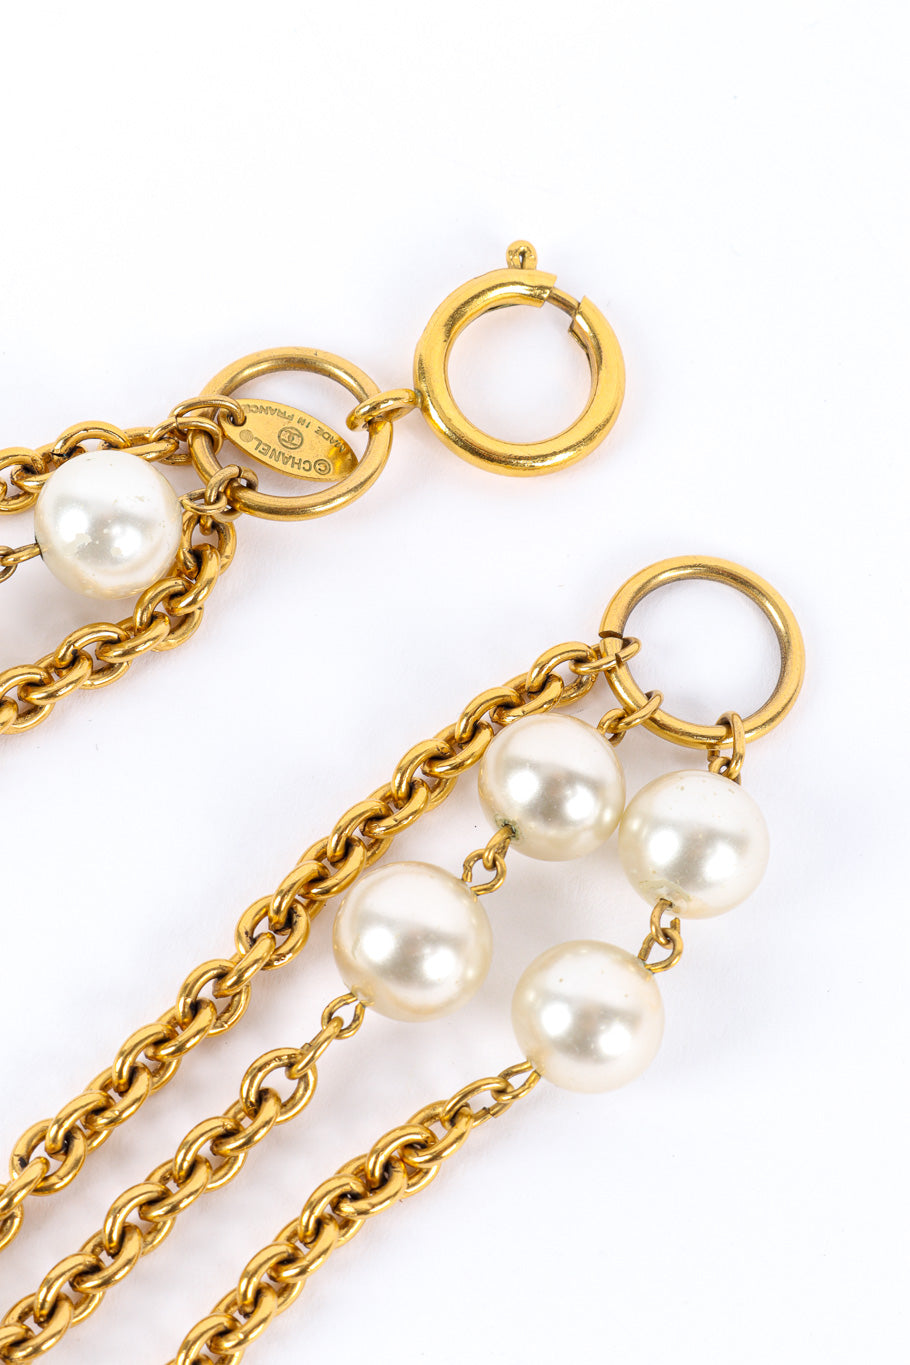 Chanel triple stand pearl necklace spring clasp @recessla